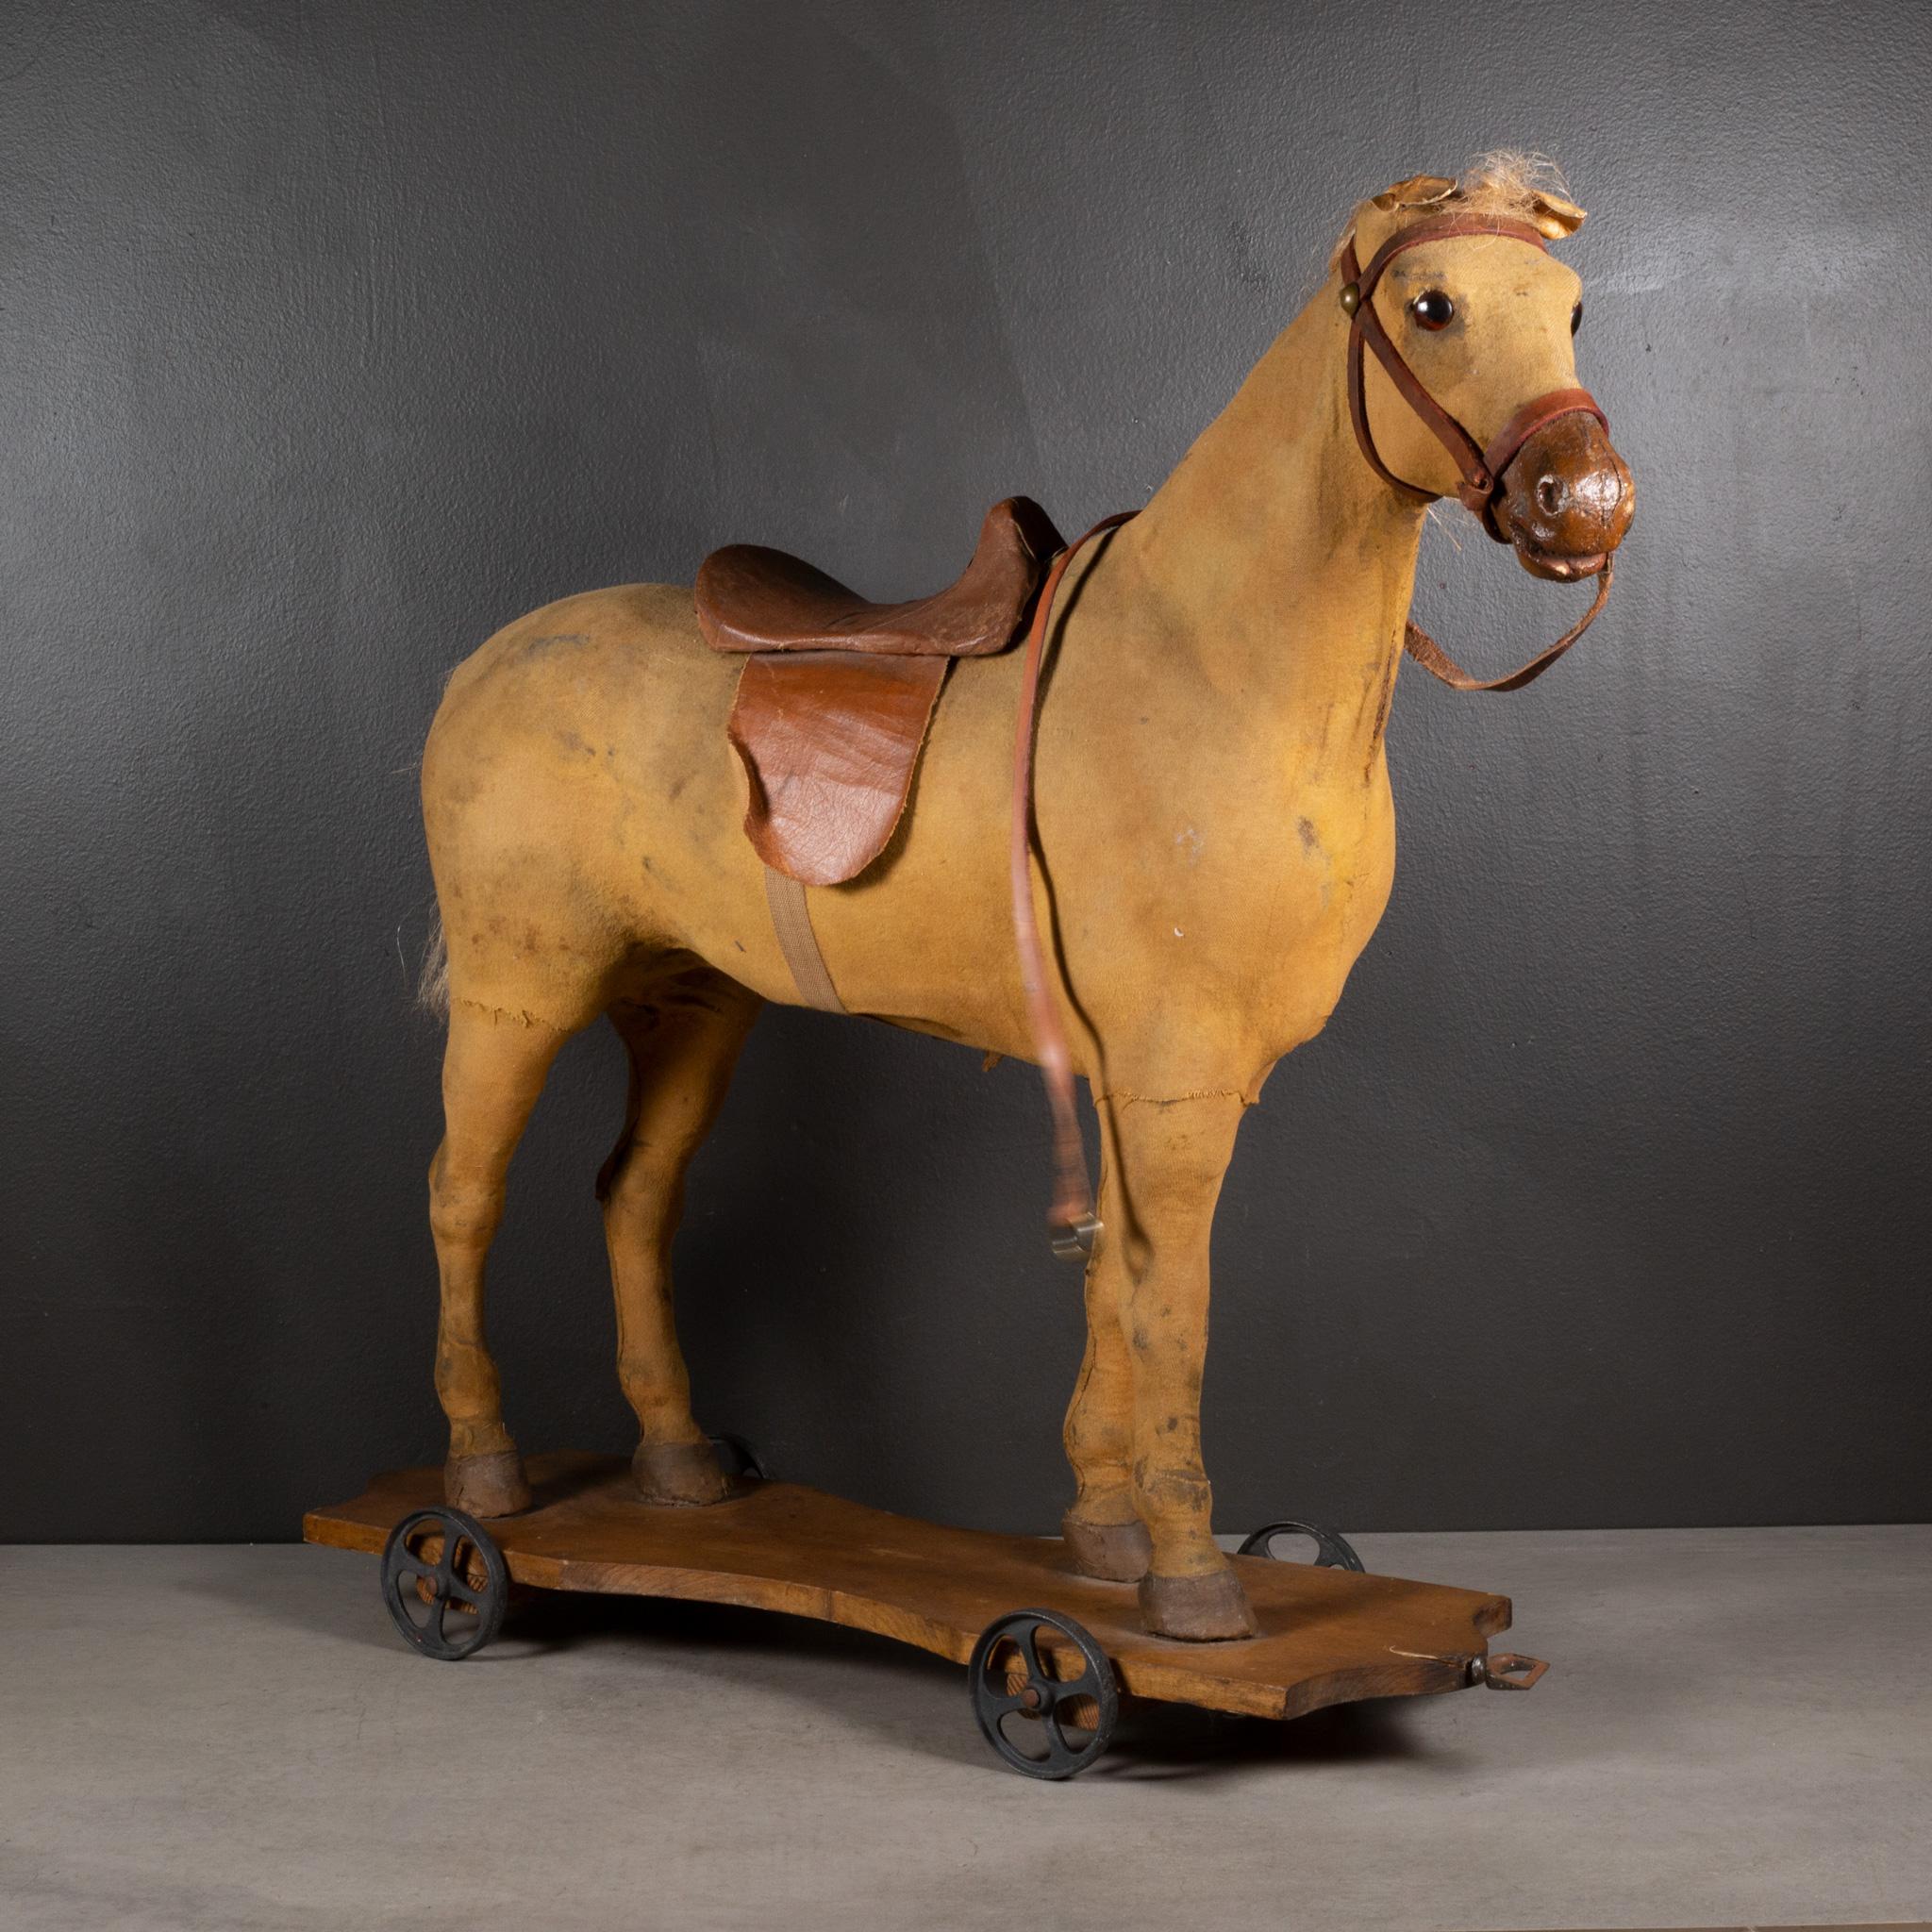 ABOUT

An early 20th century carved wooden horse pull-toy covered in fabric with glass eyes, leatherette ears, leather saddle and halter, human hair tail and mane mounted on a shaped wooden platform with steel wheels. Brass rings on the reins and